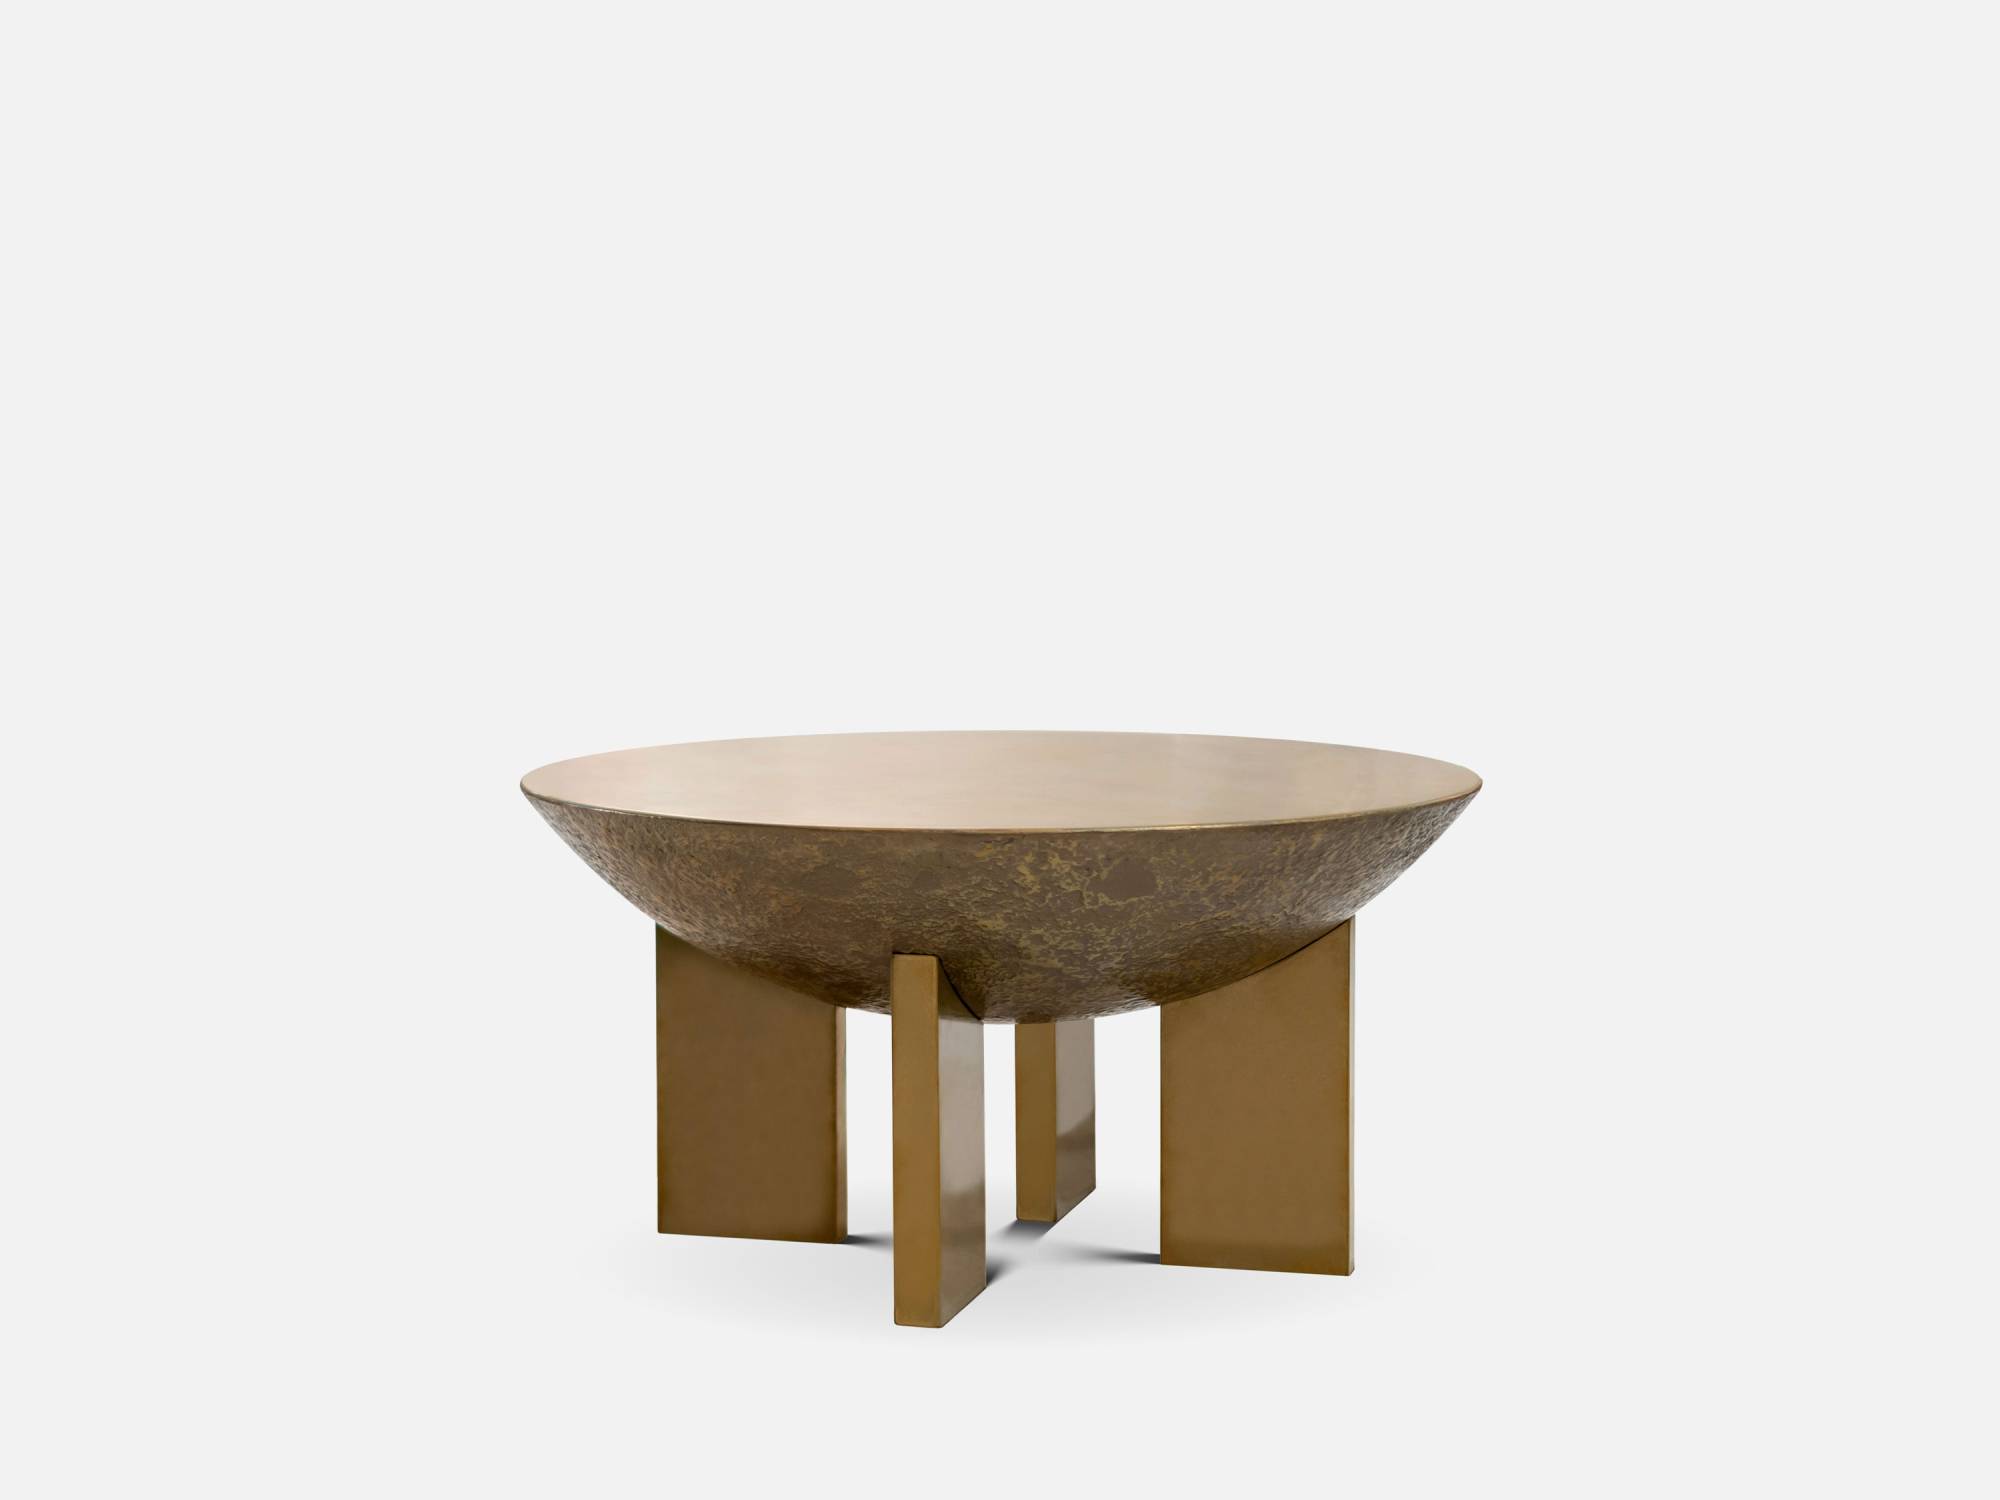 ART. 2282 - C.G. Capelletti quality furniture with made in Italy contemporary Small tables